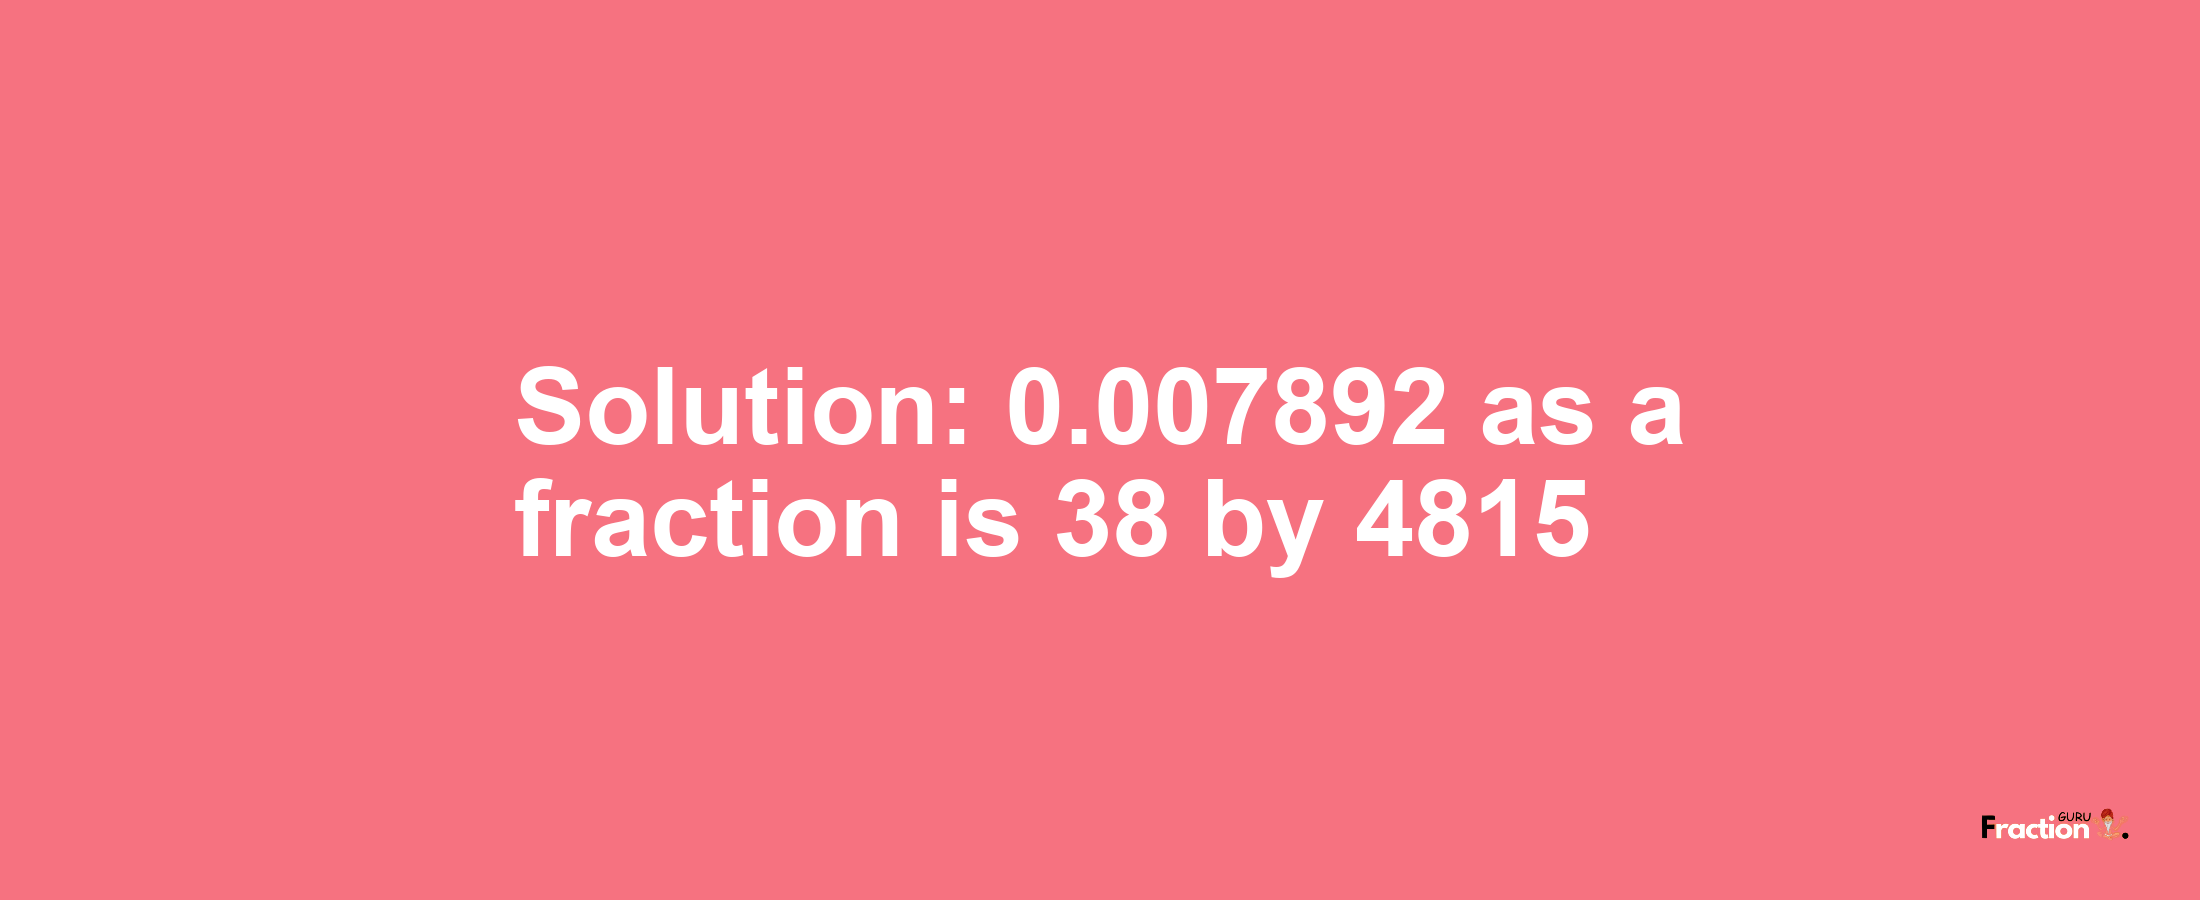 Solution:0.007892 as a fraction is 38/4815